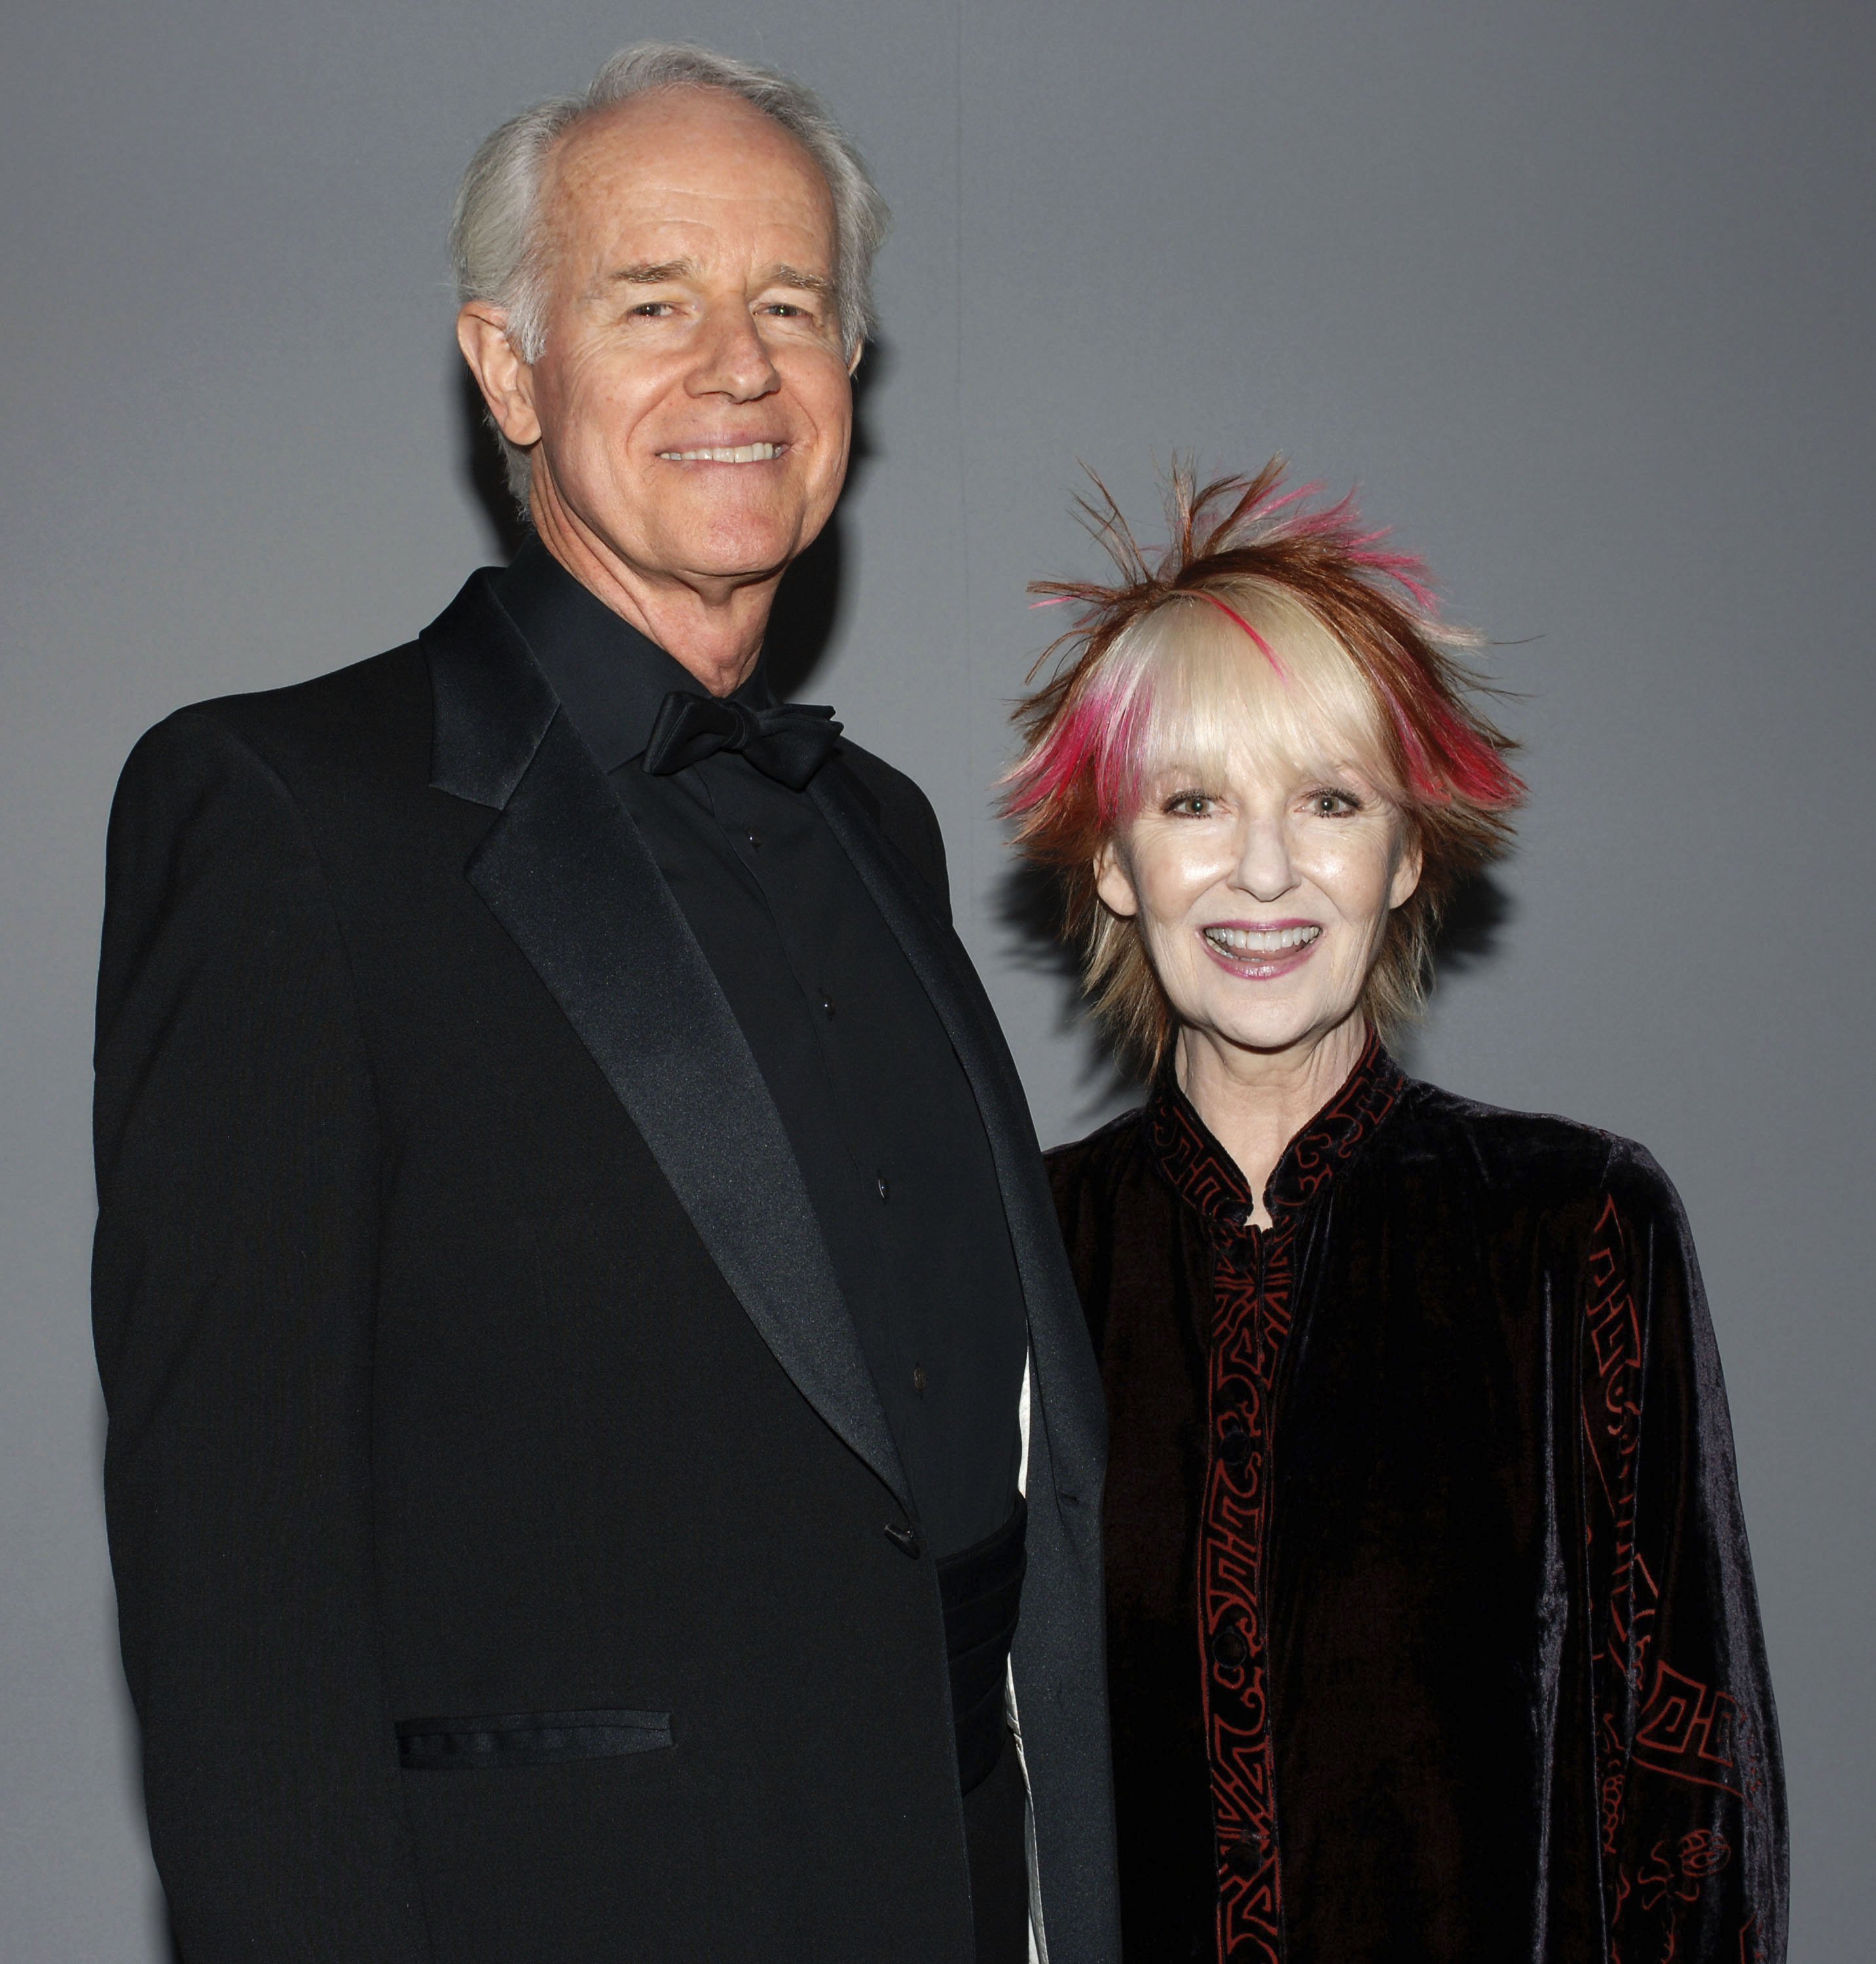 Mike Farrell and wife Shelley Fabares attend the 12th Annual Screen Actors Guild Awards at Los Angeles Shrine Exposition Center on January 29, 2006 in Los Angeles, California. / Source: Getty Images